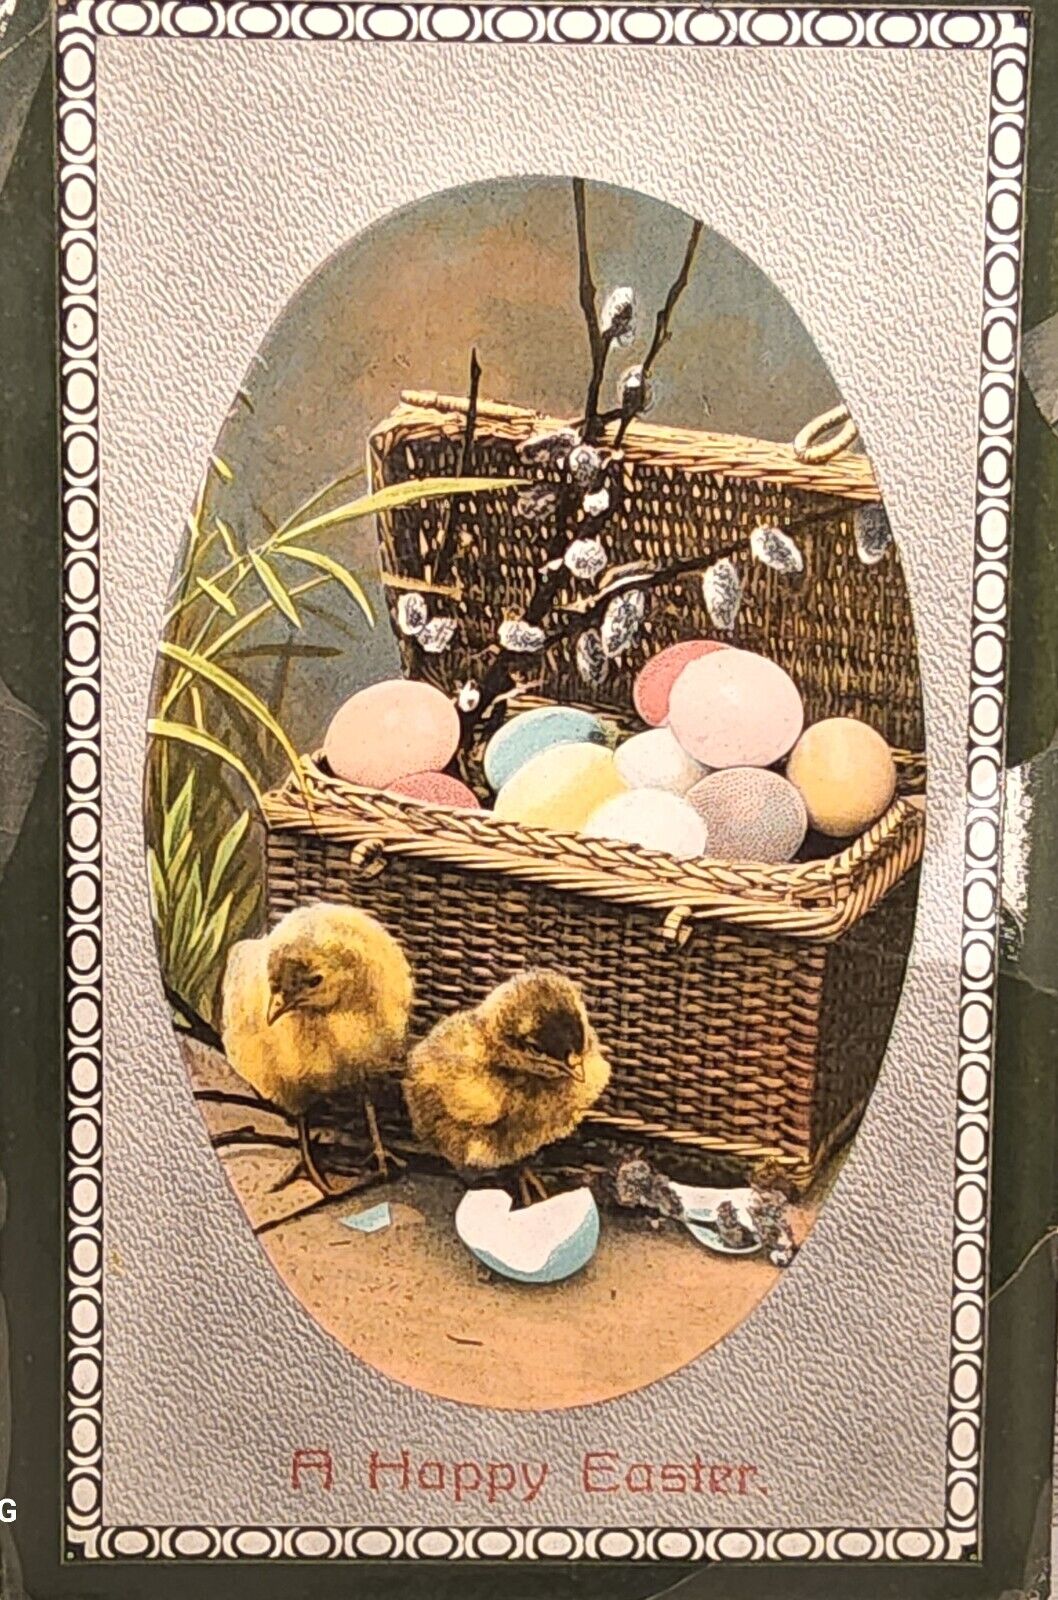 1911 Happy Easter Greetings Postcard~Chick & Easter Eggs~#-2914.